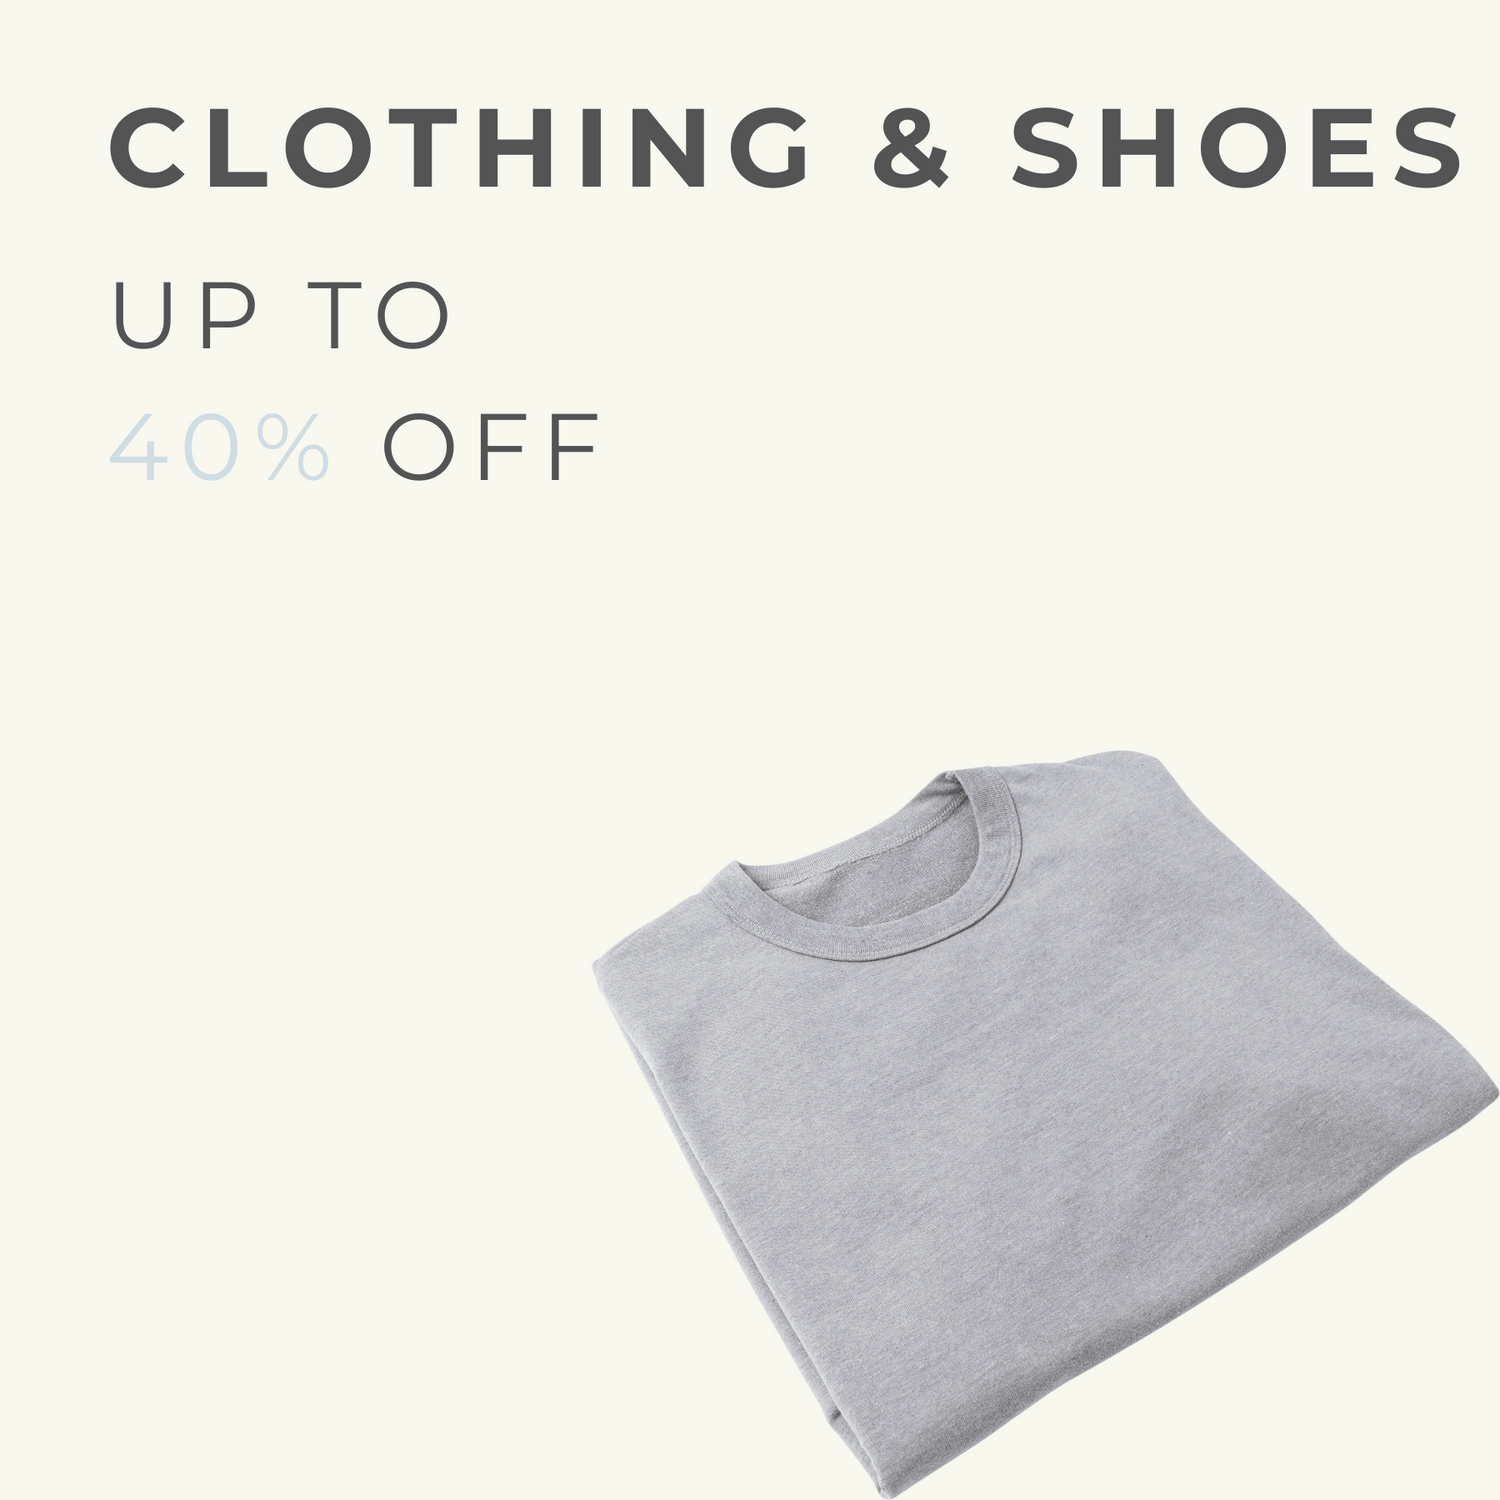 Neatly folded gray t-shirt on a clean white background with text stating 'CLOTHING & SHOES UP TO 40% OFF', indicating a significant discount on apparel and footwear.